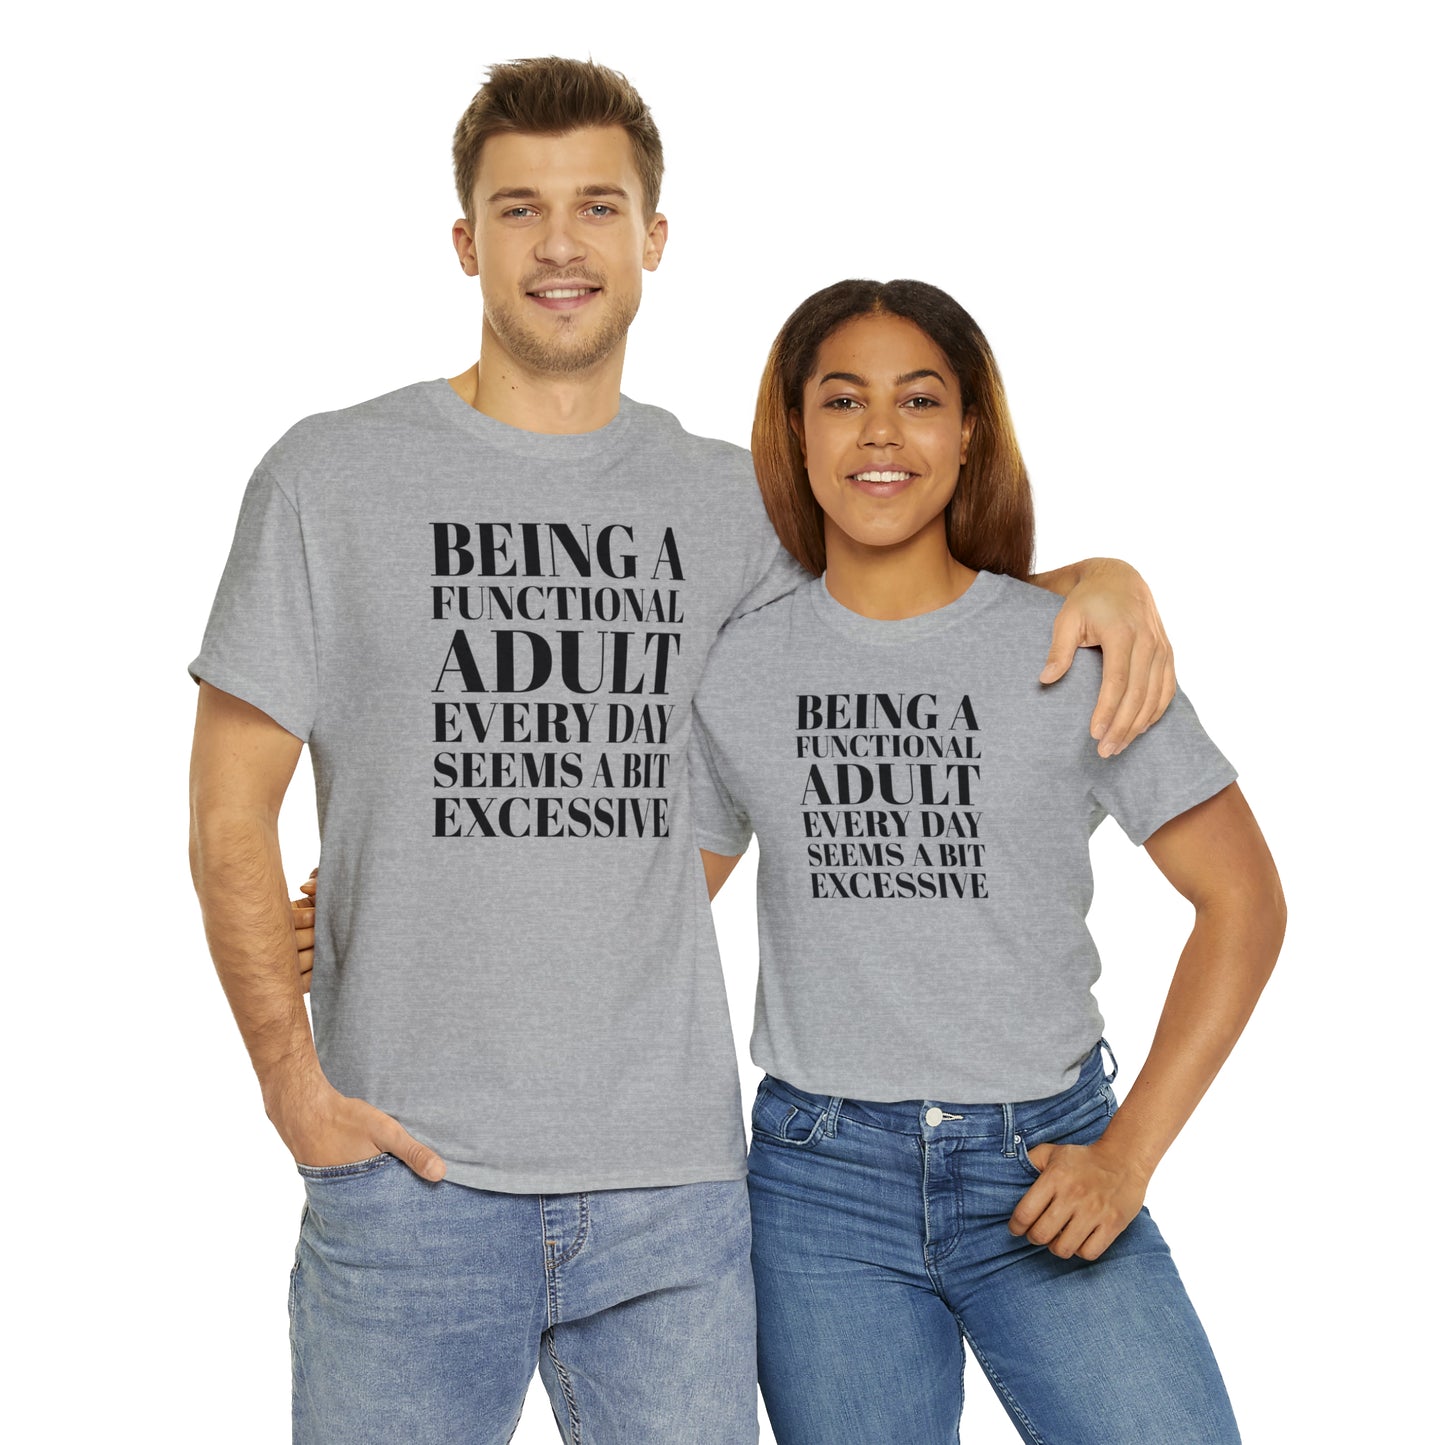 Functional Adult T-Shirt For Sarcastic Adult TShirt For Funny Quote T Shirt For Adult Children TShirt Humorous Tee For Funny Gift Shirt